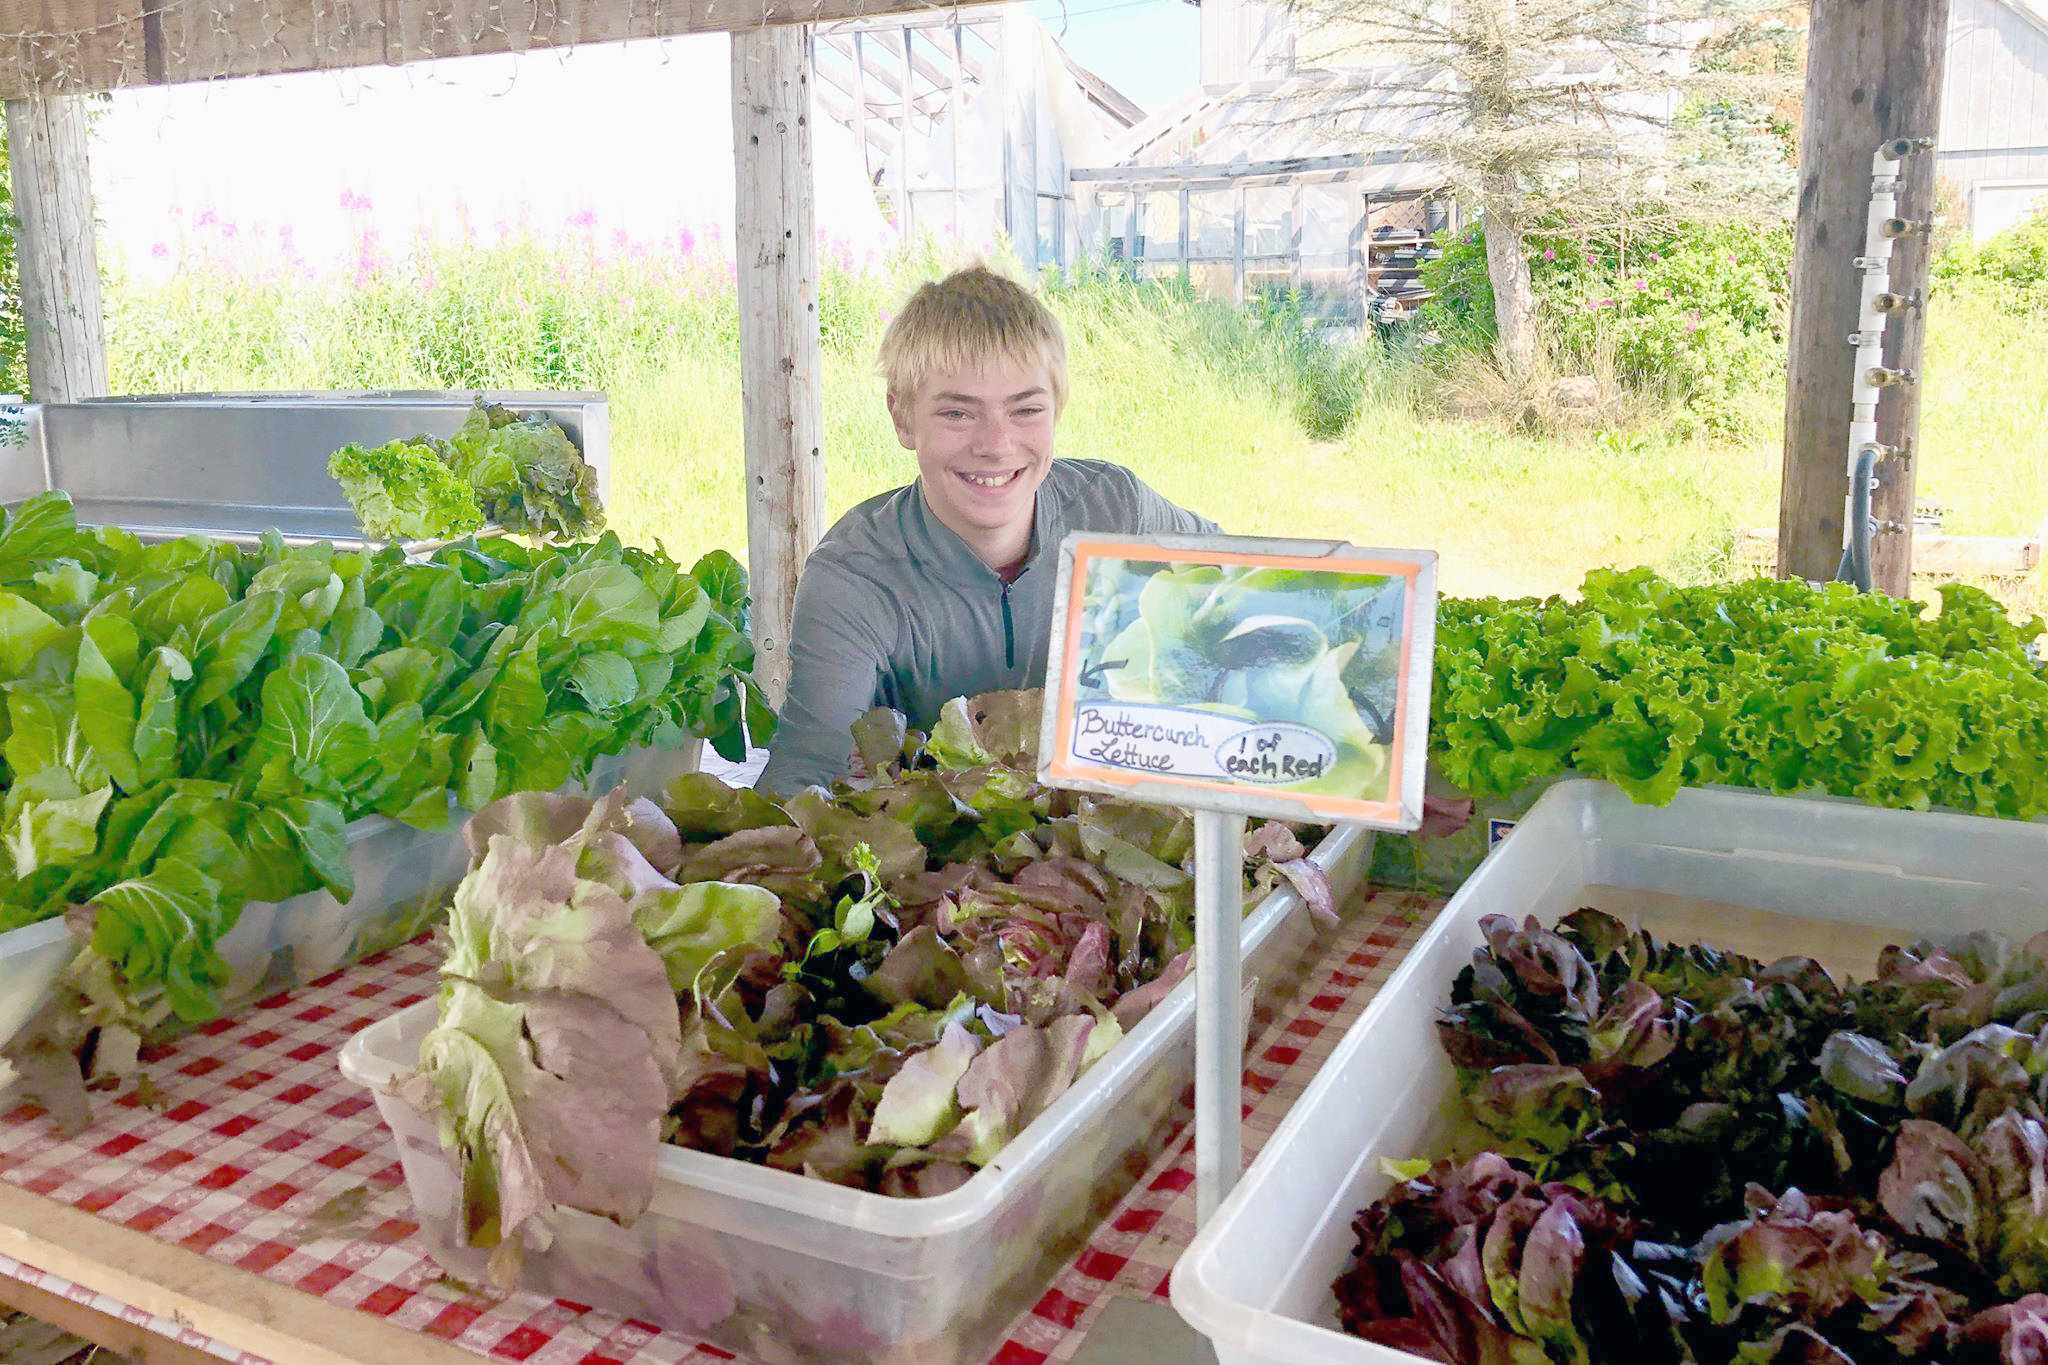 photos by Victoria Petersen / Peninsula Clarion                                 Kale Morse places produce at the pickup center Wednesday for Ridgeway Farm’s Community Supported Agriculture programs, which help distribute locally grown produce to residents near Soldotna.